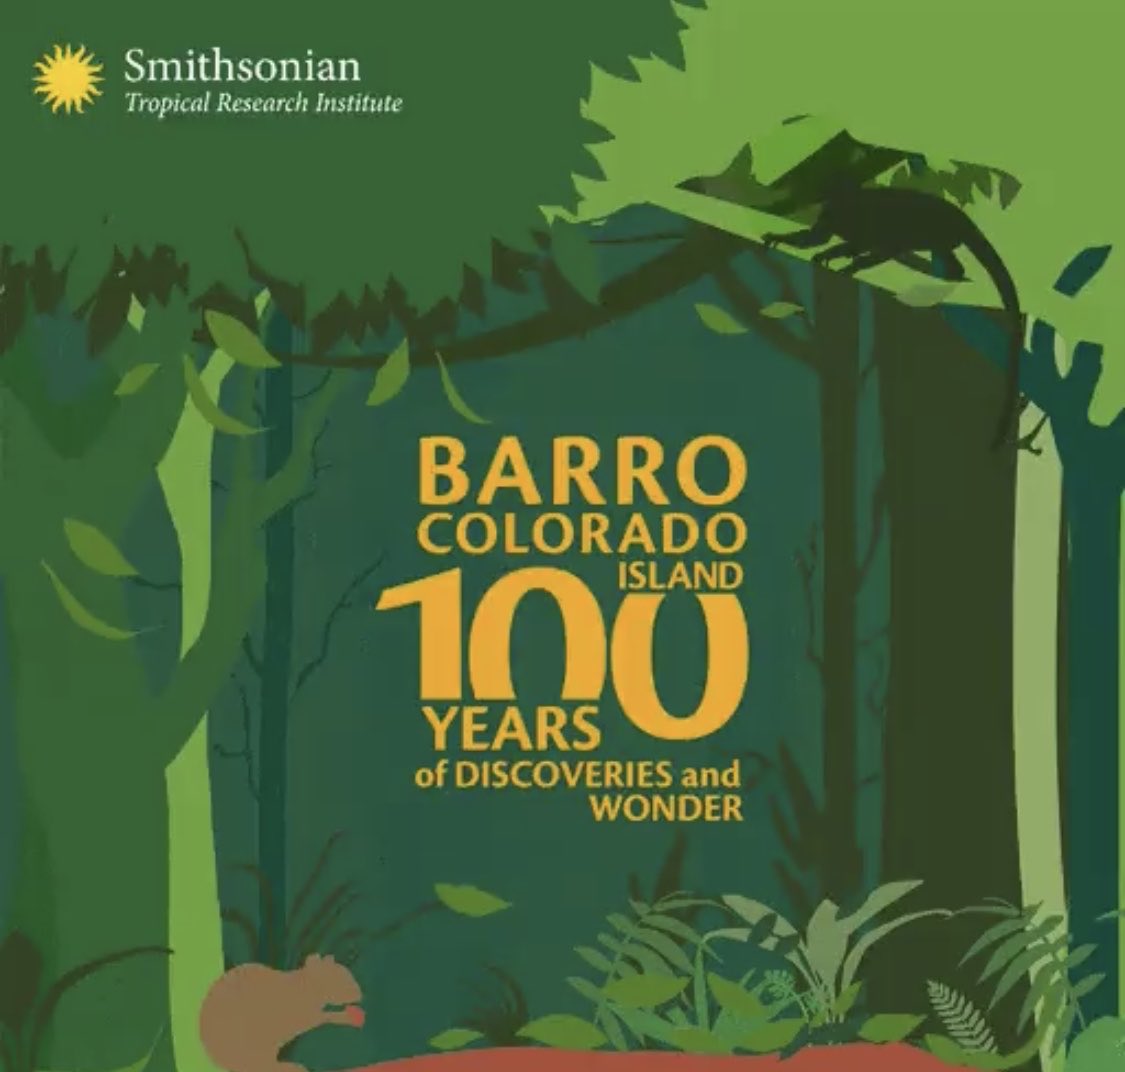 Congratulations to @Smithsonian for 100 years of research in #BarroColorado Island in #Panama. Generations of scientists and students have unveiled its secrets and made it the best known tropical forest in the world. ⁦@stri_panama⁩